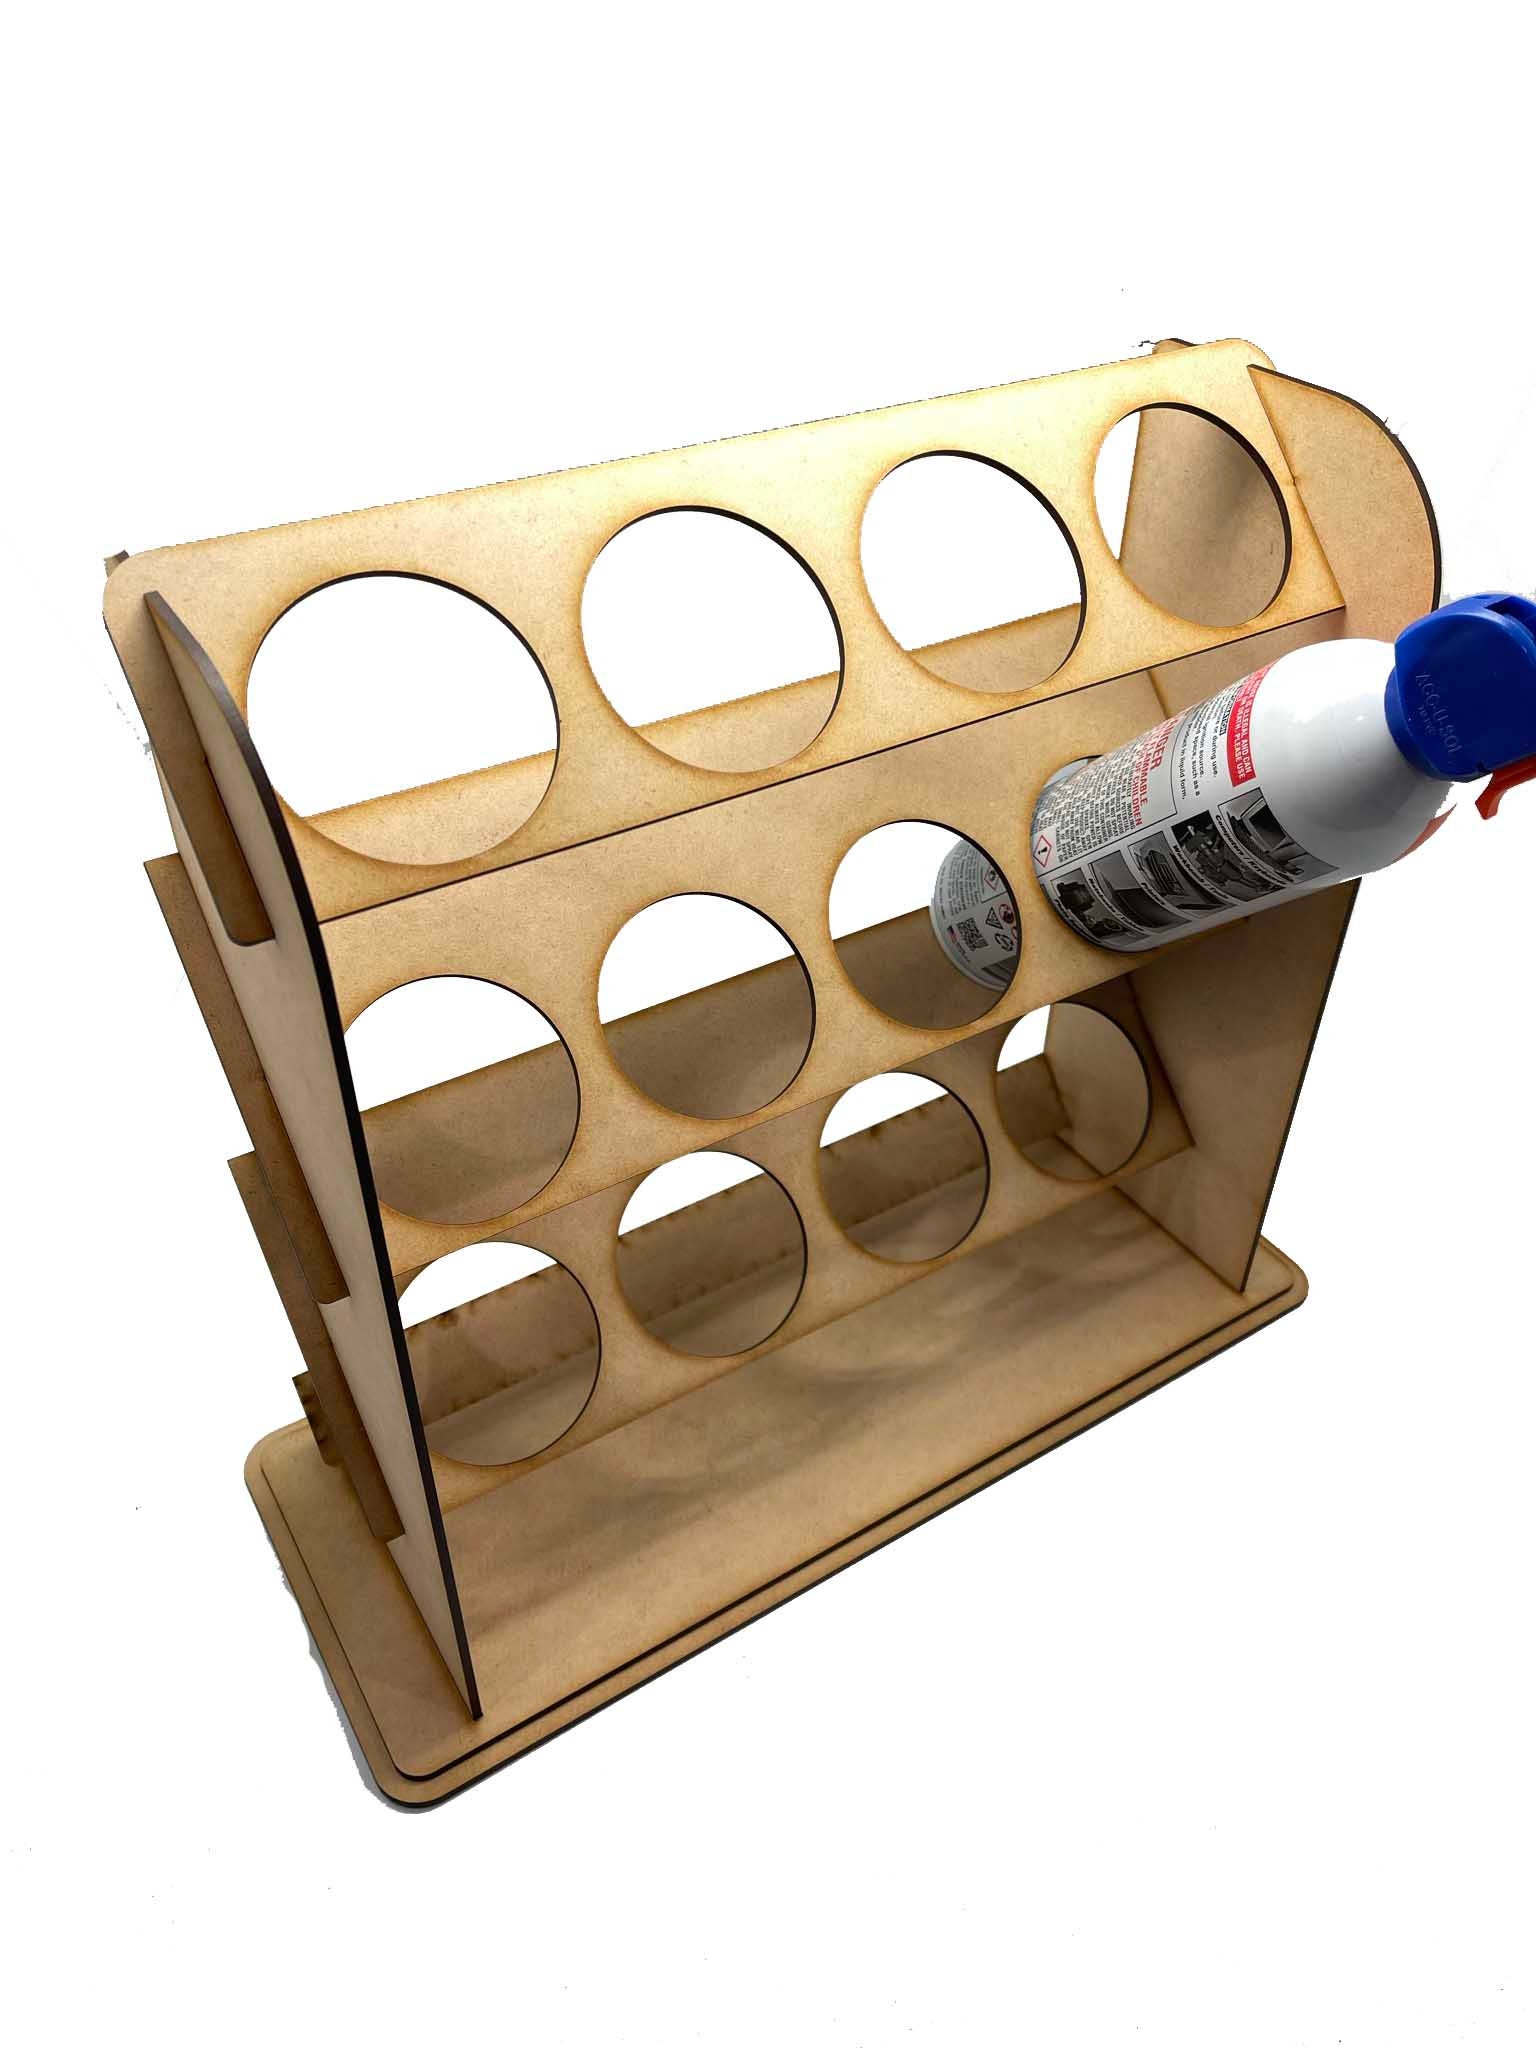 Garage Storage Solutions A3 Spray Paint Can Bottle Organizer Use Wasted  Wall Space 4 Kits to Choose Holds 36-144 Cans NEW LOWER Price 